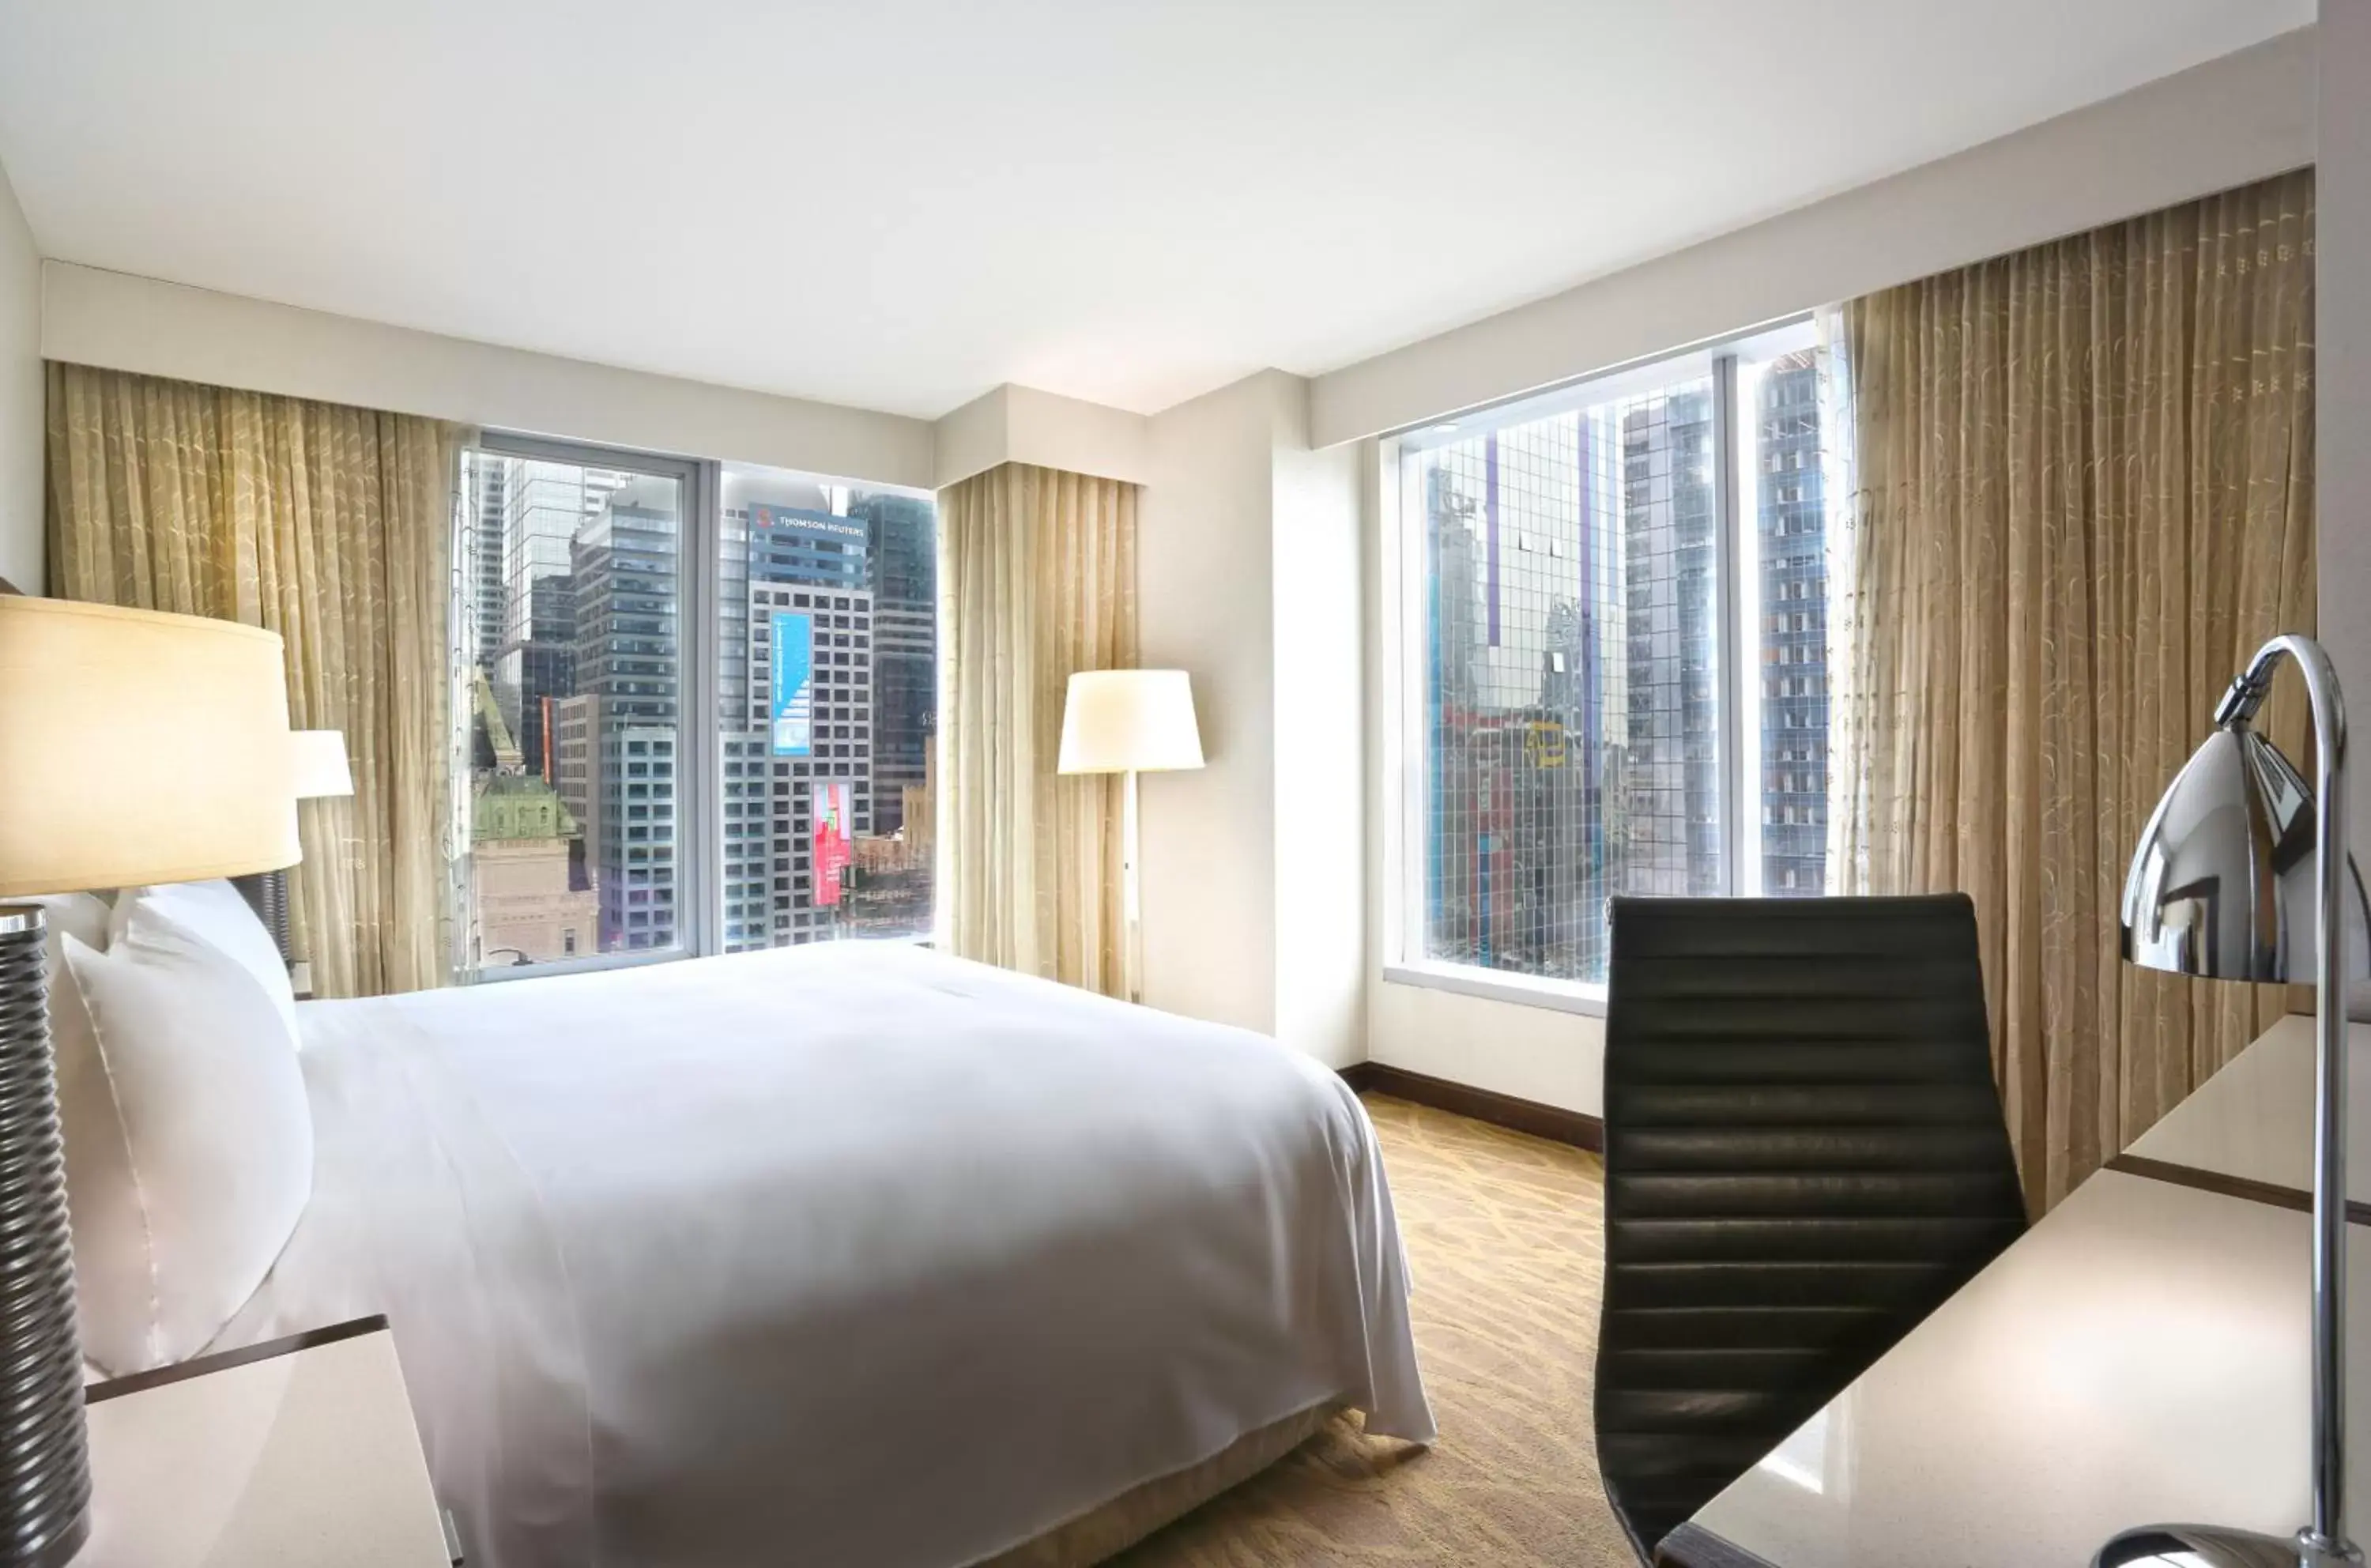 Premium Corner King Room with Midtown View in InterContinental New York Times Square, an IHG Hotel